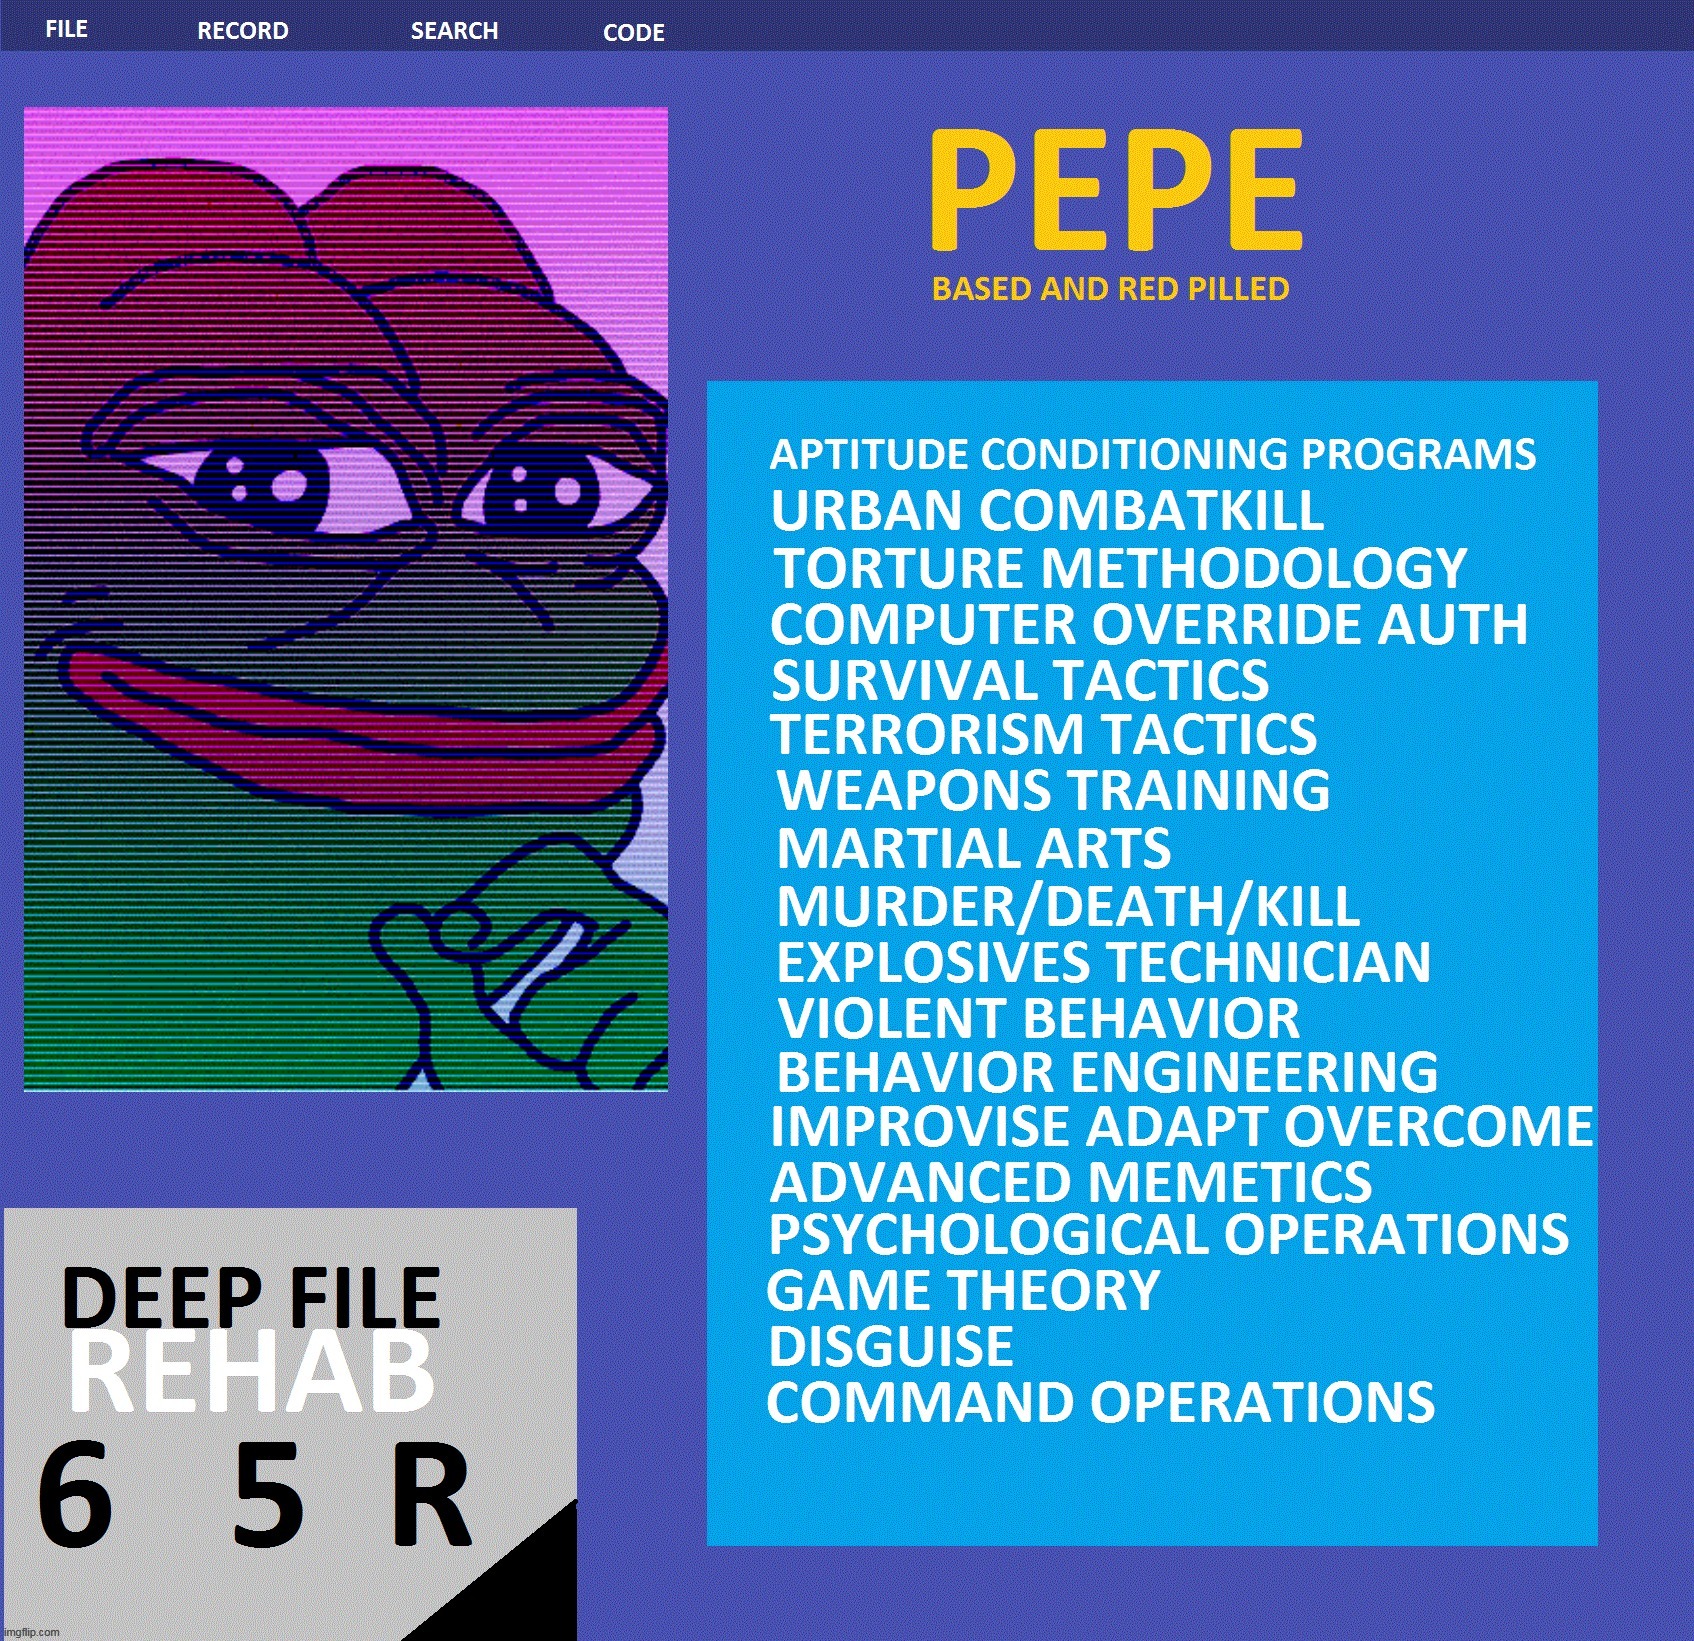 PEPE Deep File REHAB 65R | image tagged in pepe the frog,pepe,deep file rehab 65r,demolition,based,red pilled | made w/ Imgflip meme maker